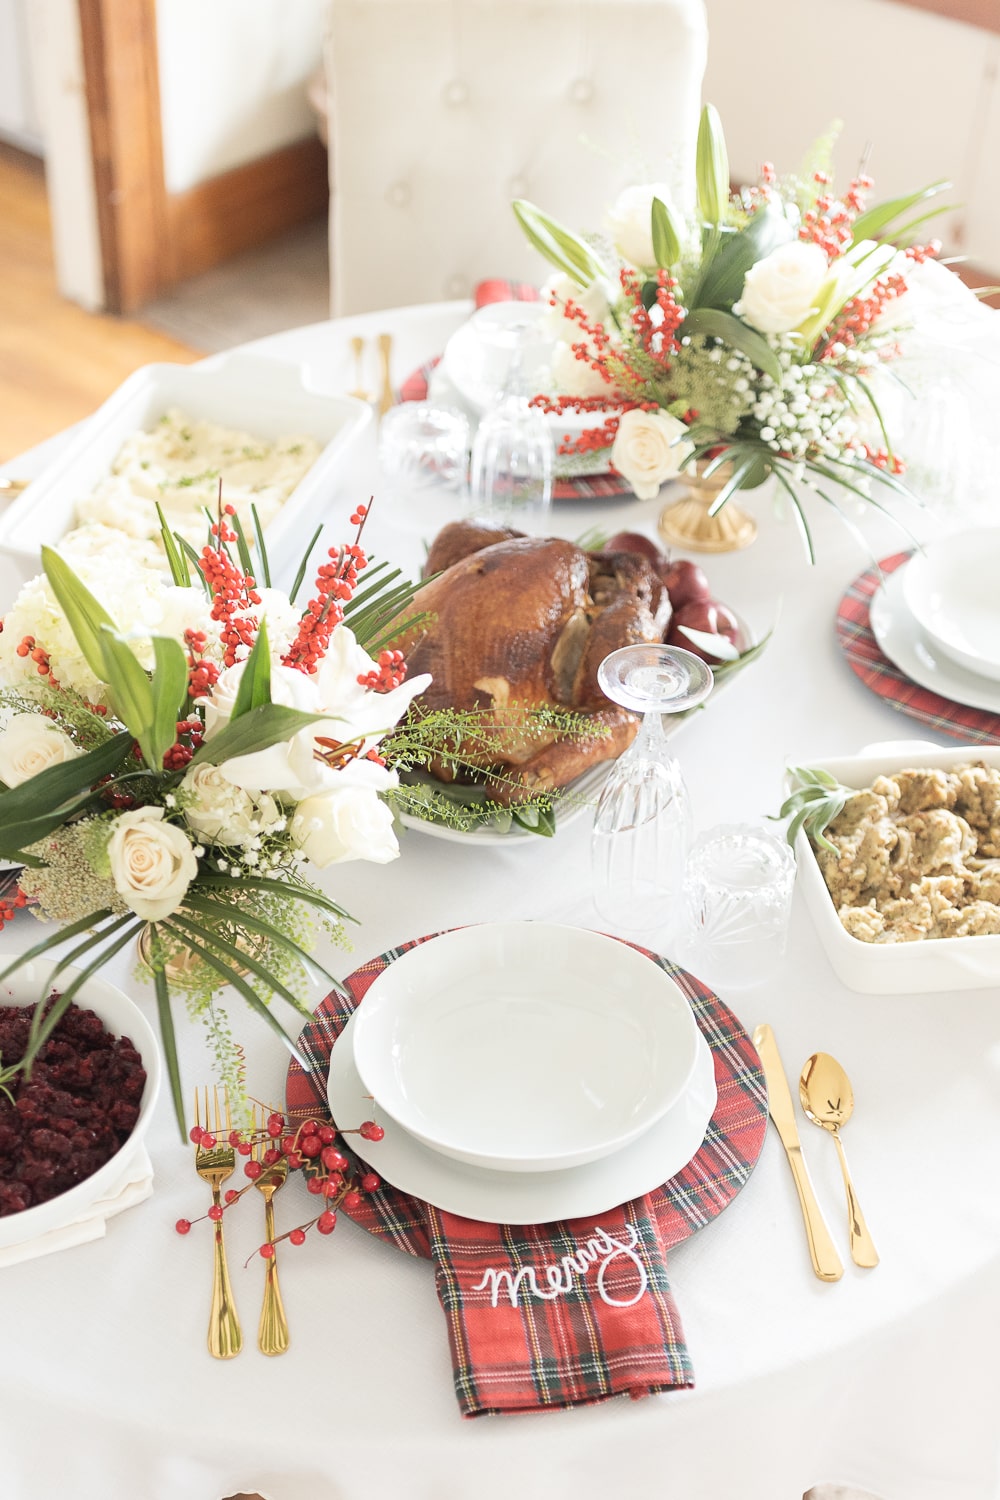 Two easy to make christmas centerpieces designed by blogger and amateur florist Stephanie Ziajka on Diary of a Debutante